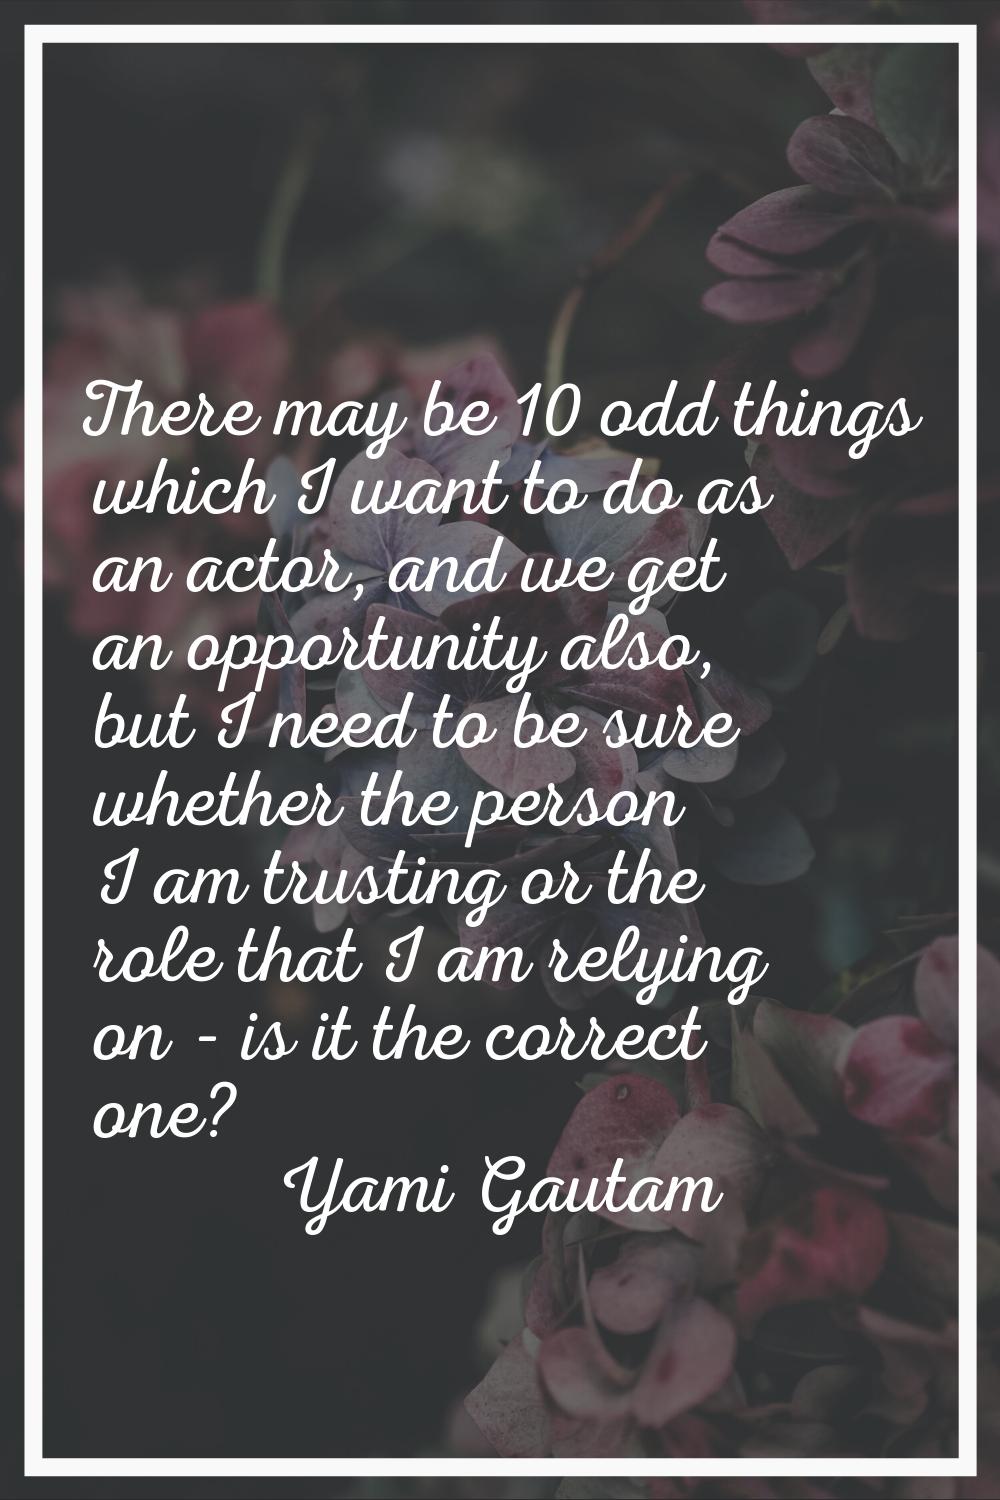 There may be 10 odd things which I want to do as an actor, and we get an opportunity also, but I ne